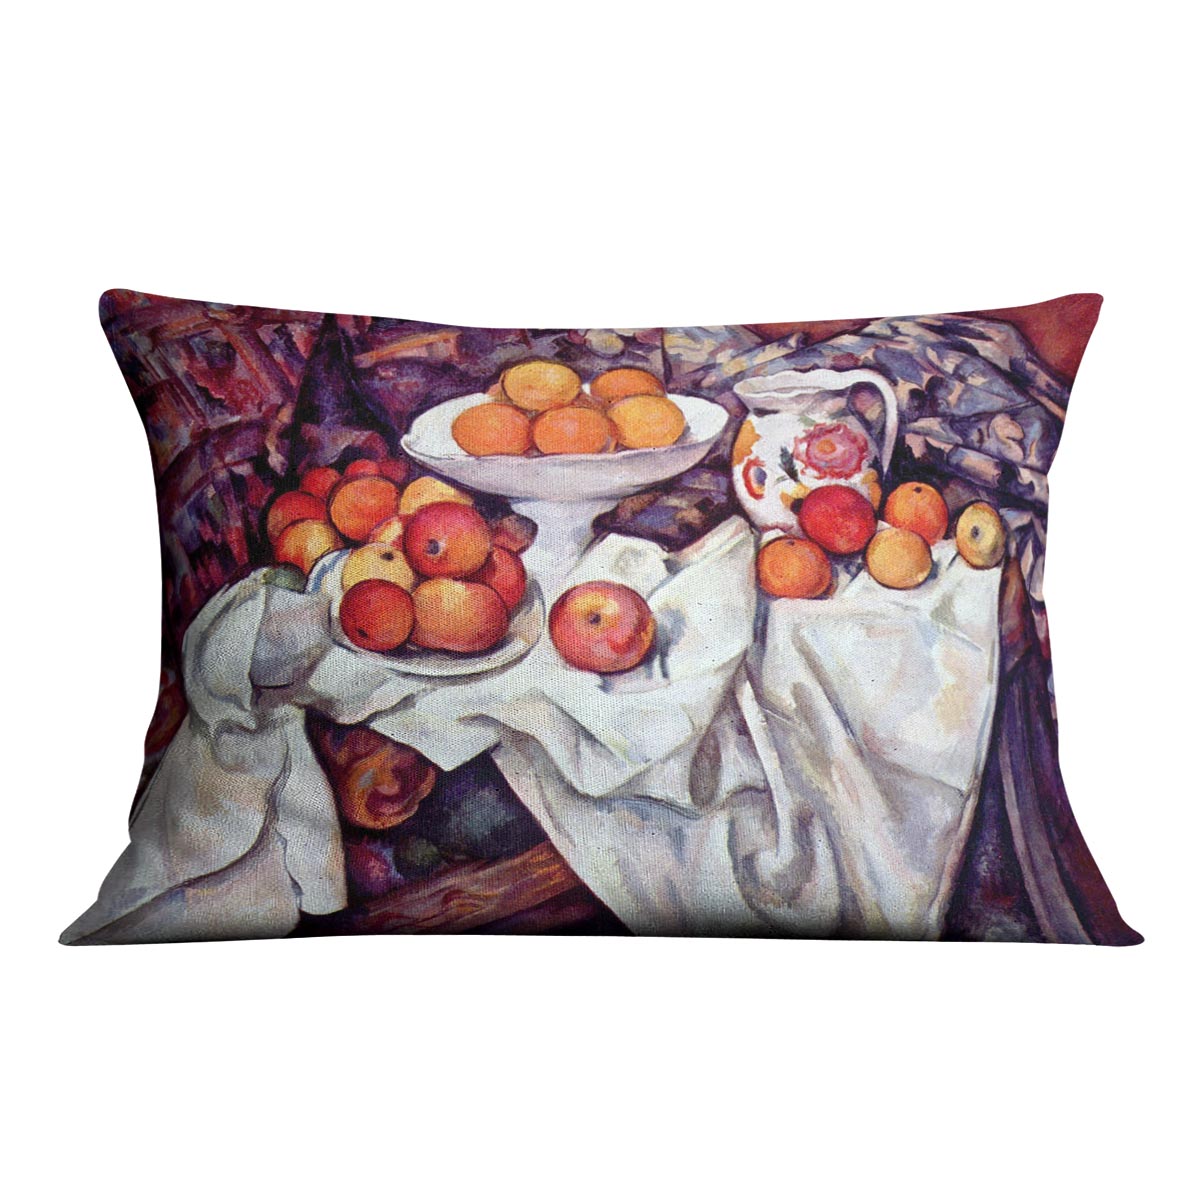 Still Life with Apples and Oranges by Cezanne Cushion